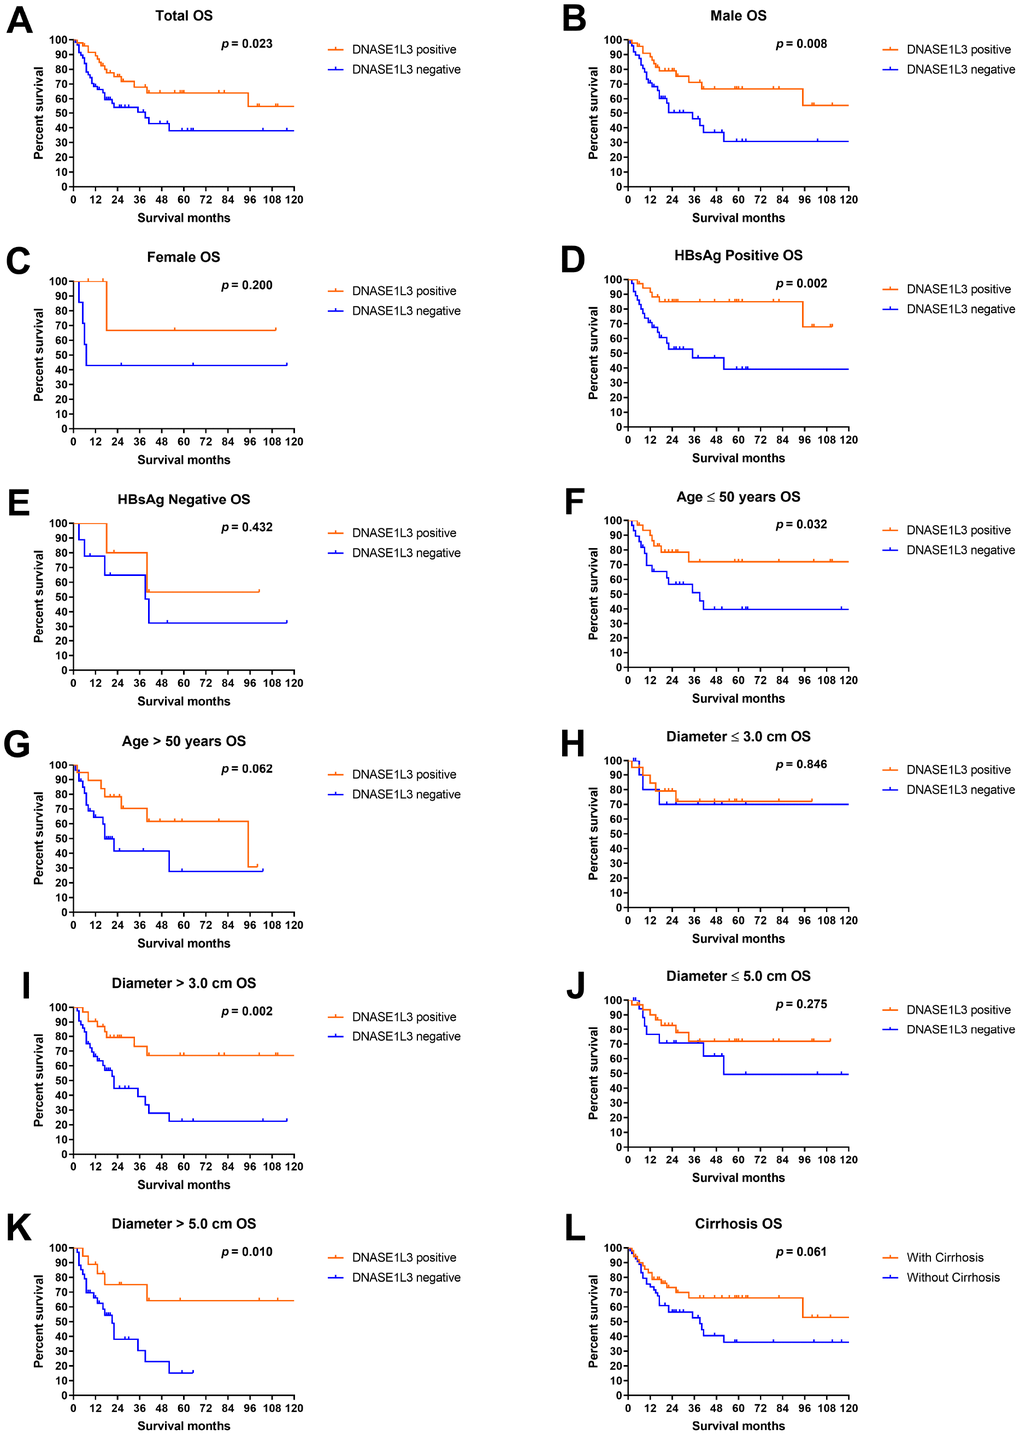 Overall survival analyses by DNASE1L3 expression level. Overall survival analyses according to DNASE1L3 status in all patients (A), male (B), female (C), patients with positive HBsAg (D), patients with negative HBsAg (E), patients not older than 50 years (F), patients older than 50 years (G), patients with HCC smaller than 3 cm in diameter (H), patients with HCC bigger than 3 cm in diameter (I), patients with HCC smaller than 5 cm in diameter (J), patients with HCC bigger than 5 cm in diameter (K) and patients with cirrhosis (L).